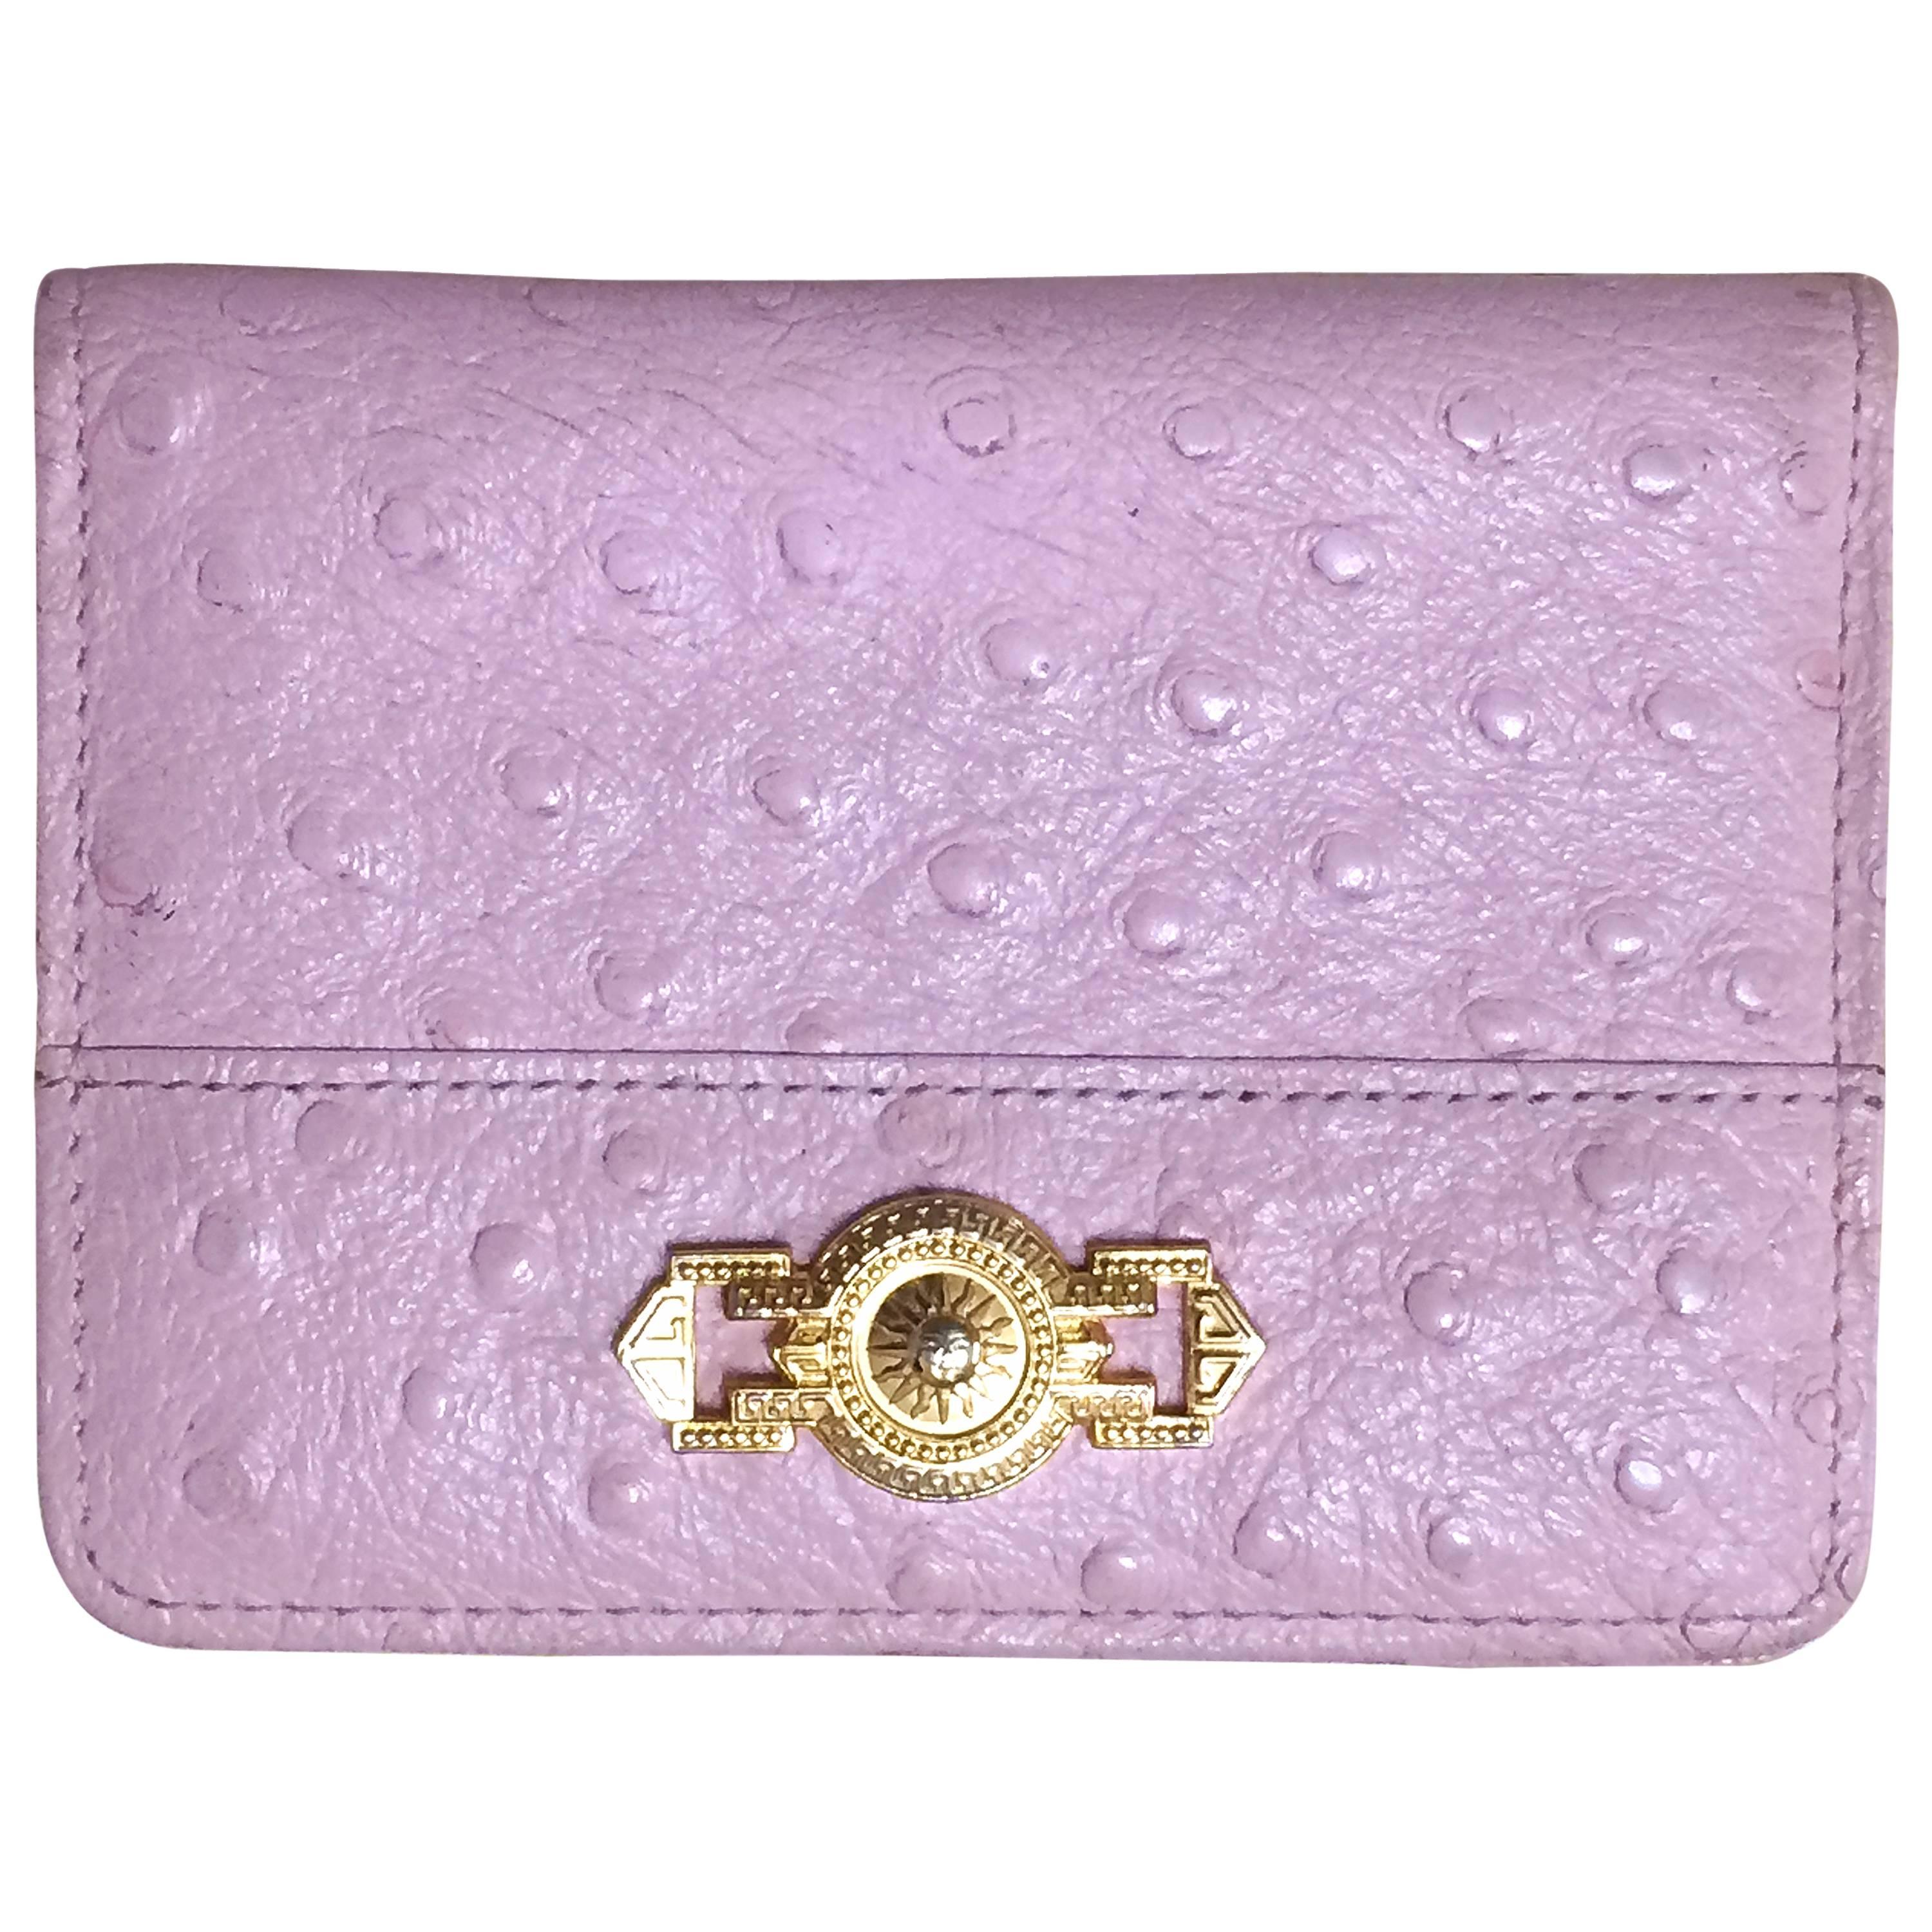 Vintage Gianni Versace ostrich-embossed pink leather card, id case, card case